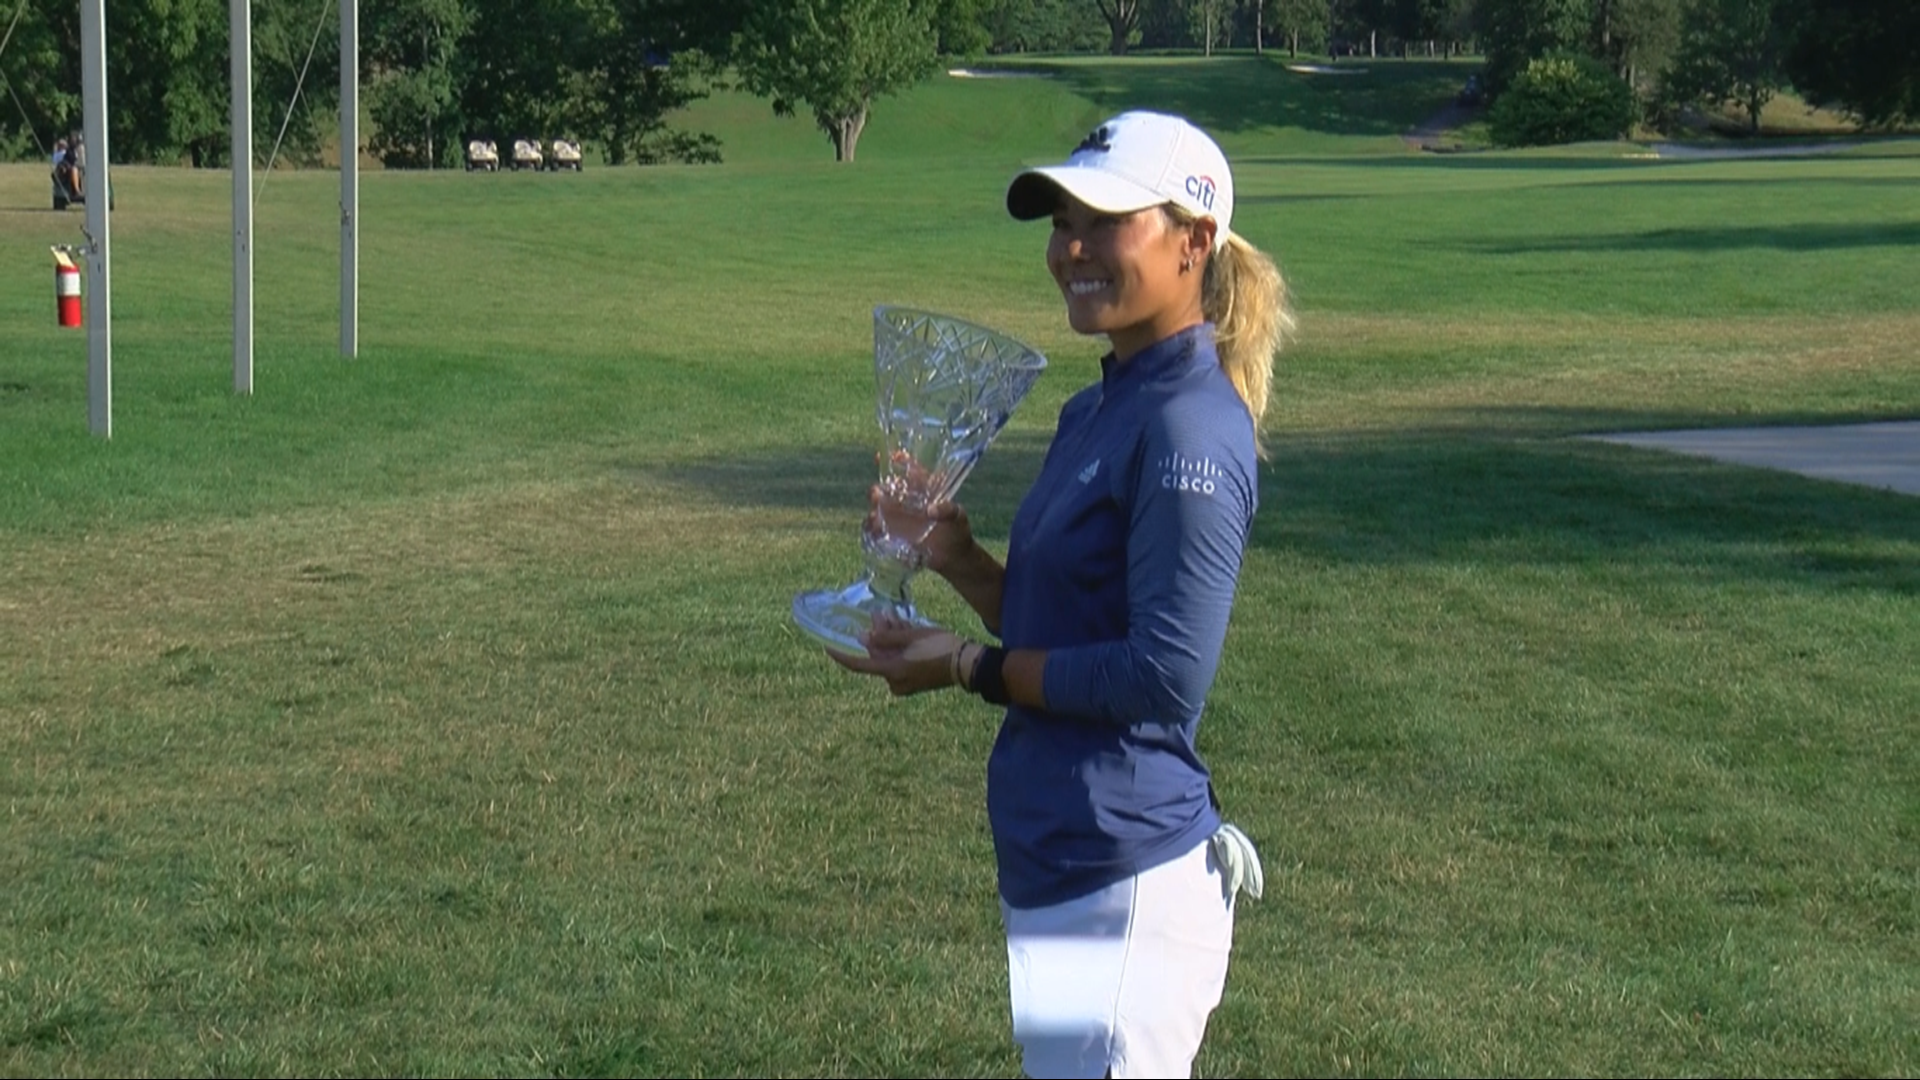 The American won her second LPGA event in two weeks, both in Toledo.